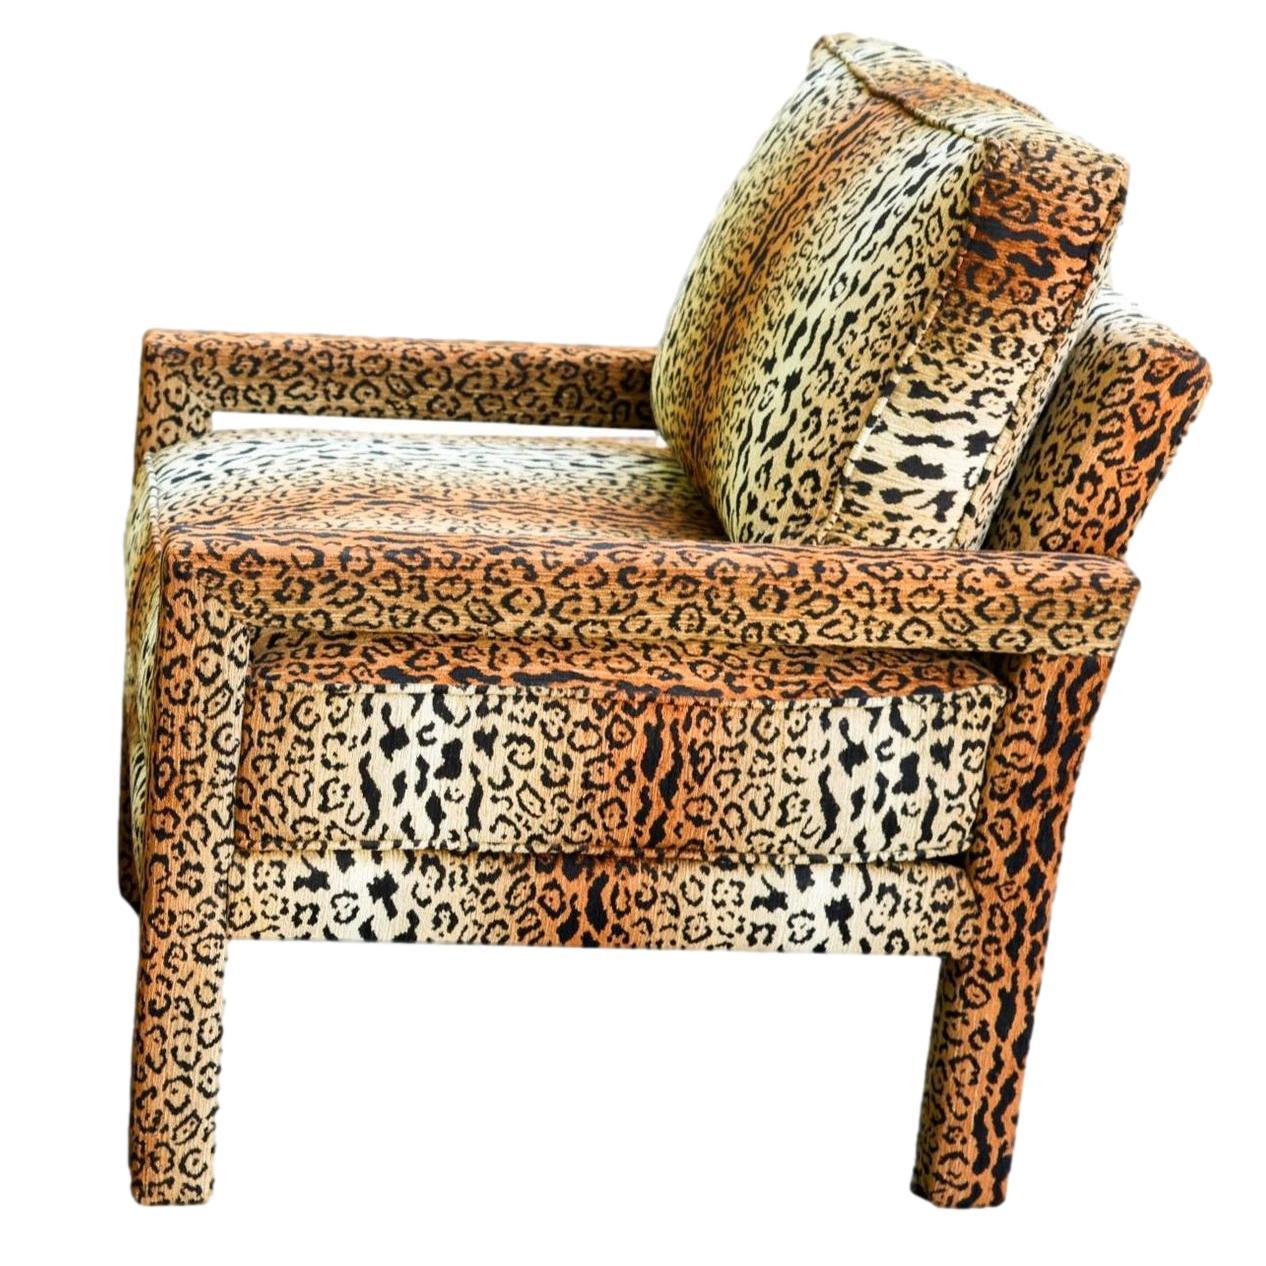 A New Milo Baughman-style Parsons Chair Upholstered in High-End Designer Cheetah Velvet. Our chairs are handcrafted and upholstered from new materials and new fabric by the best craftsmen and artisans in Morganton, North Carolina, the high-end